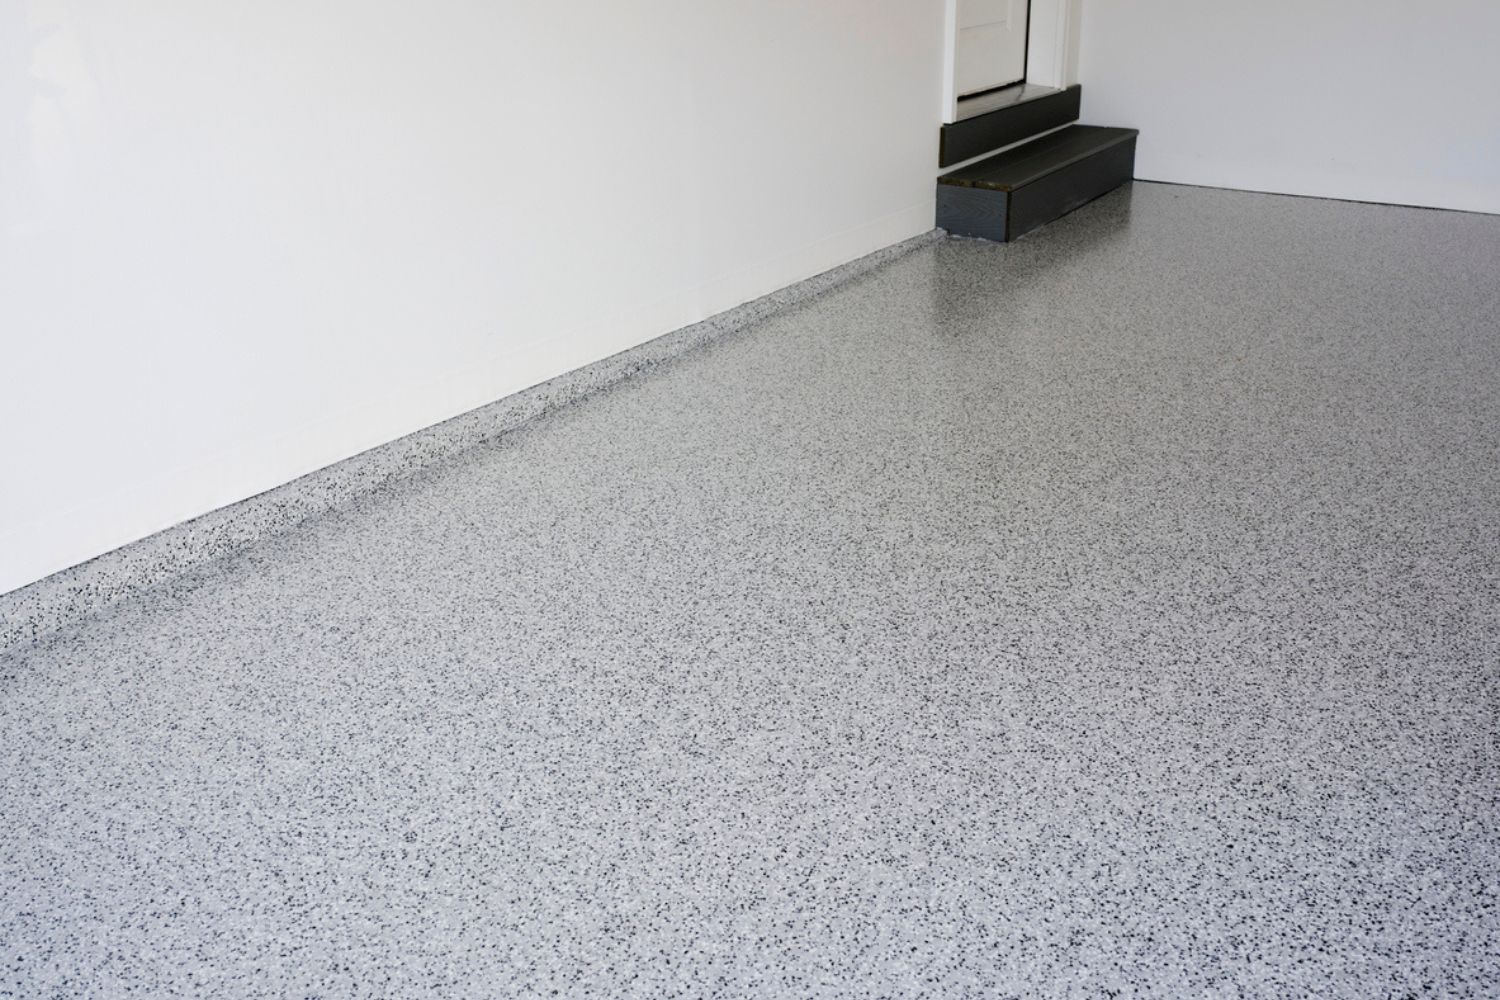 How Much Does Terrazzo Flooring Cost: Close-up shot of polished terrazzo floor tiles